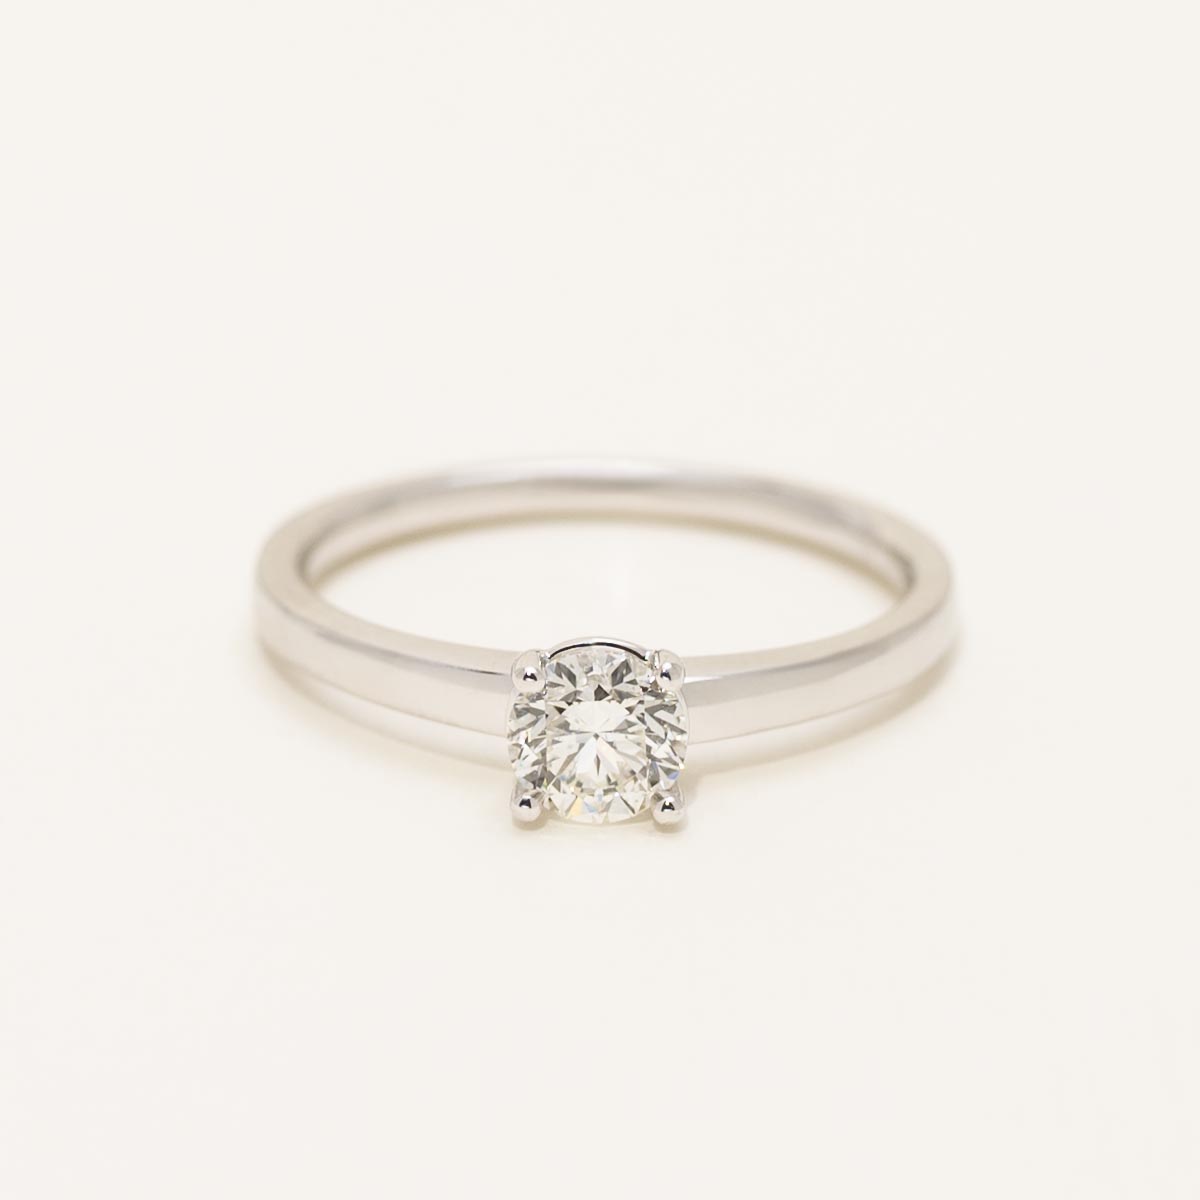 Diamond Solitaire Engagement Ring in 14kt White Gold (1/2ct)